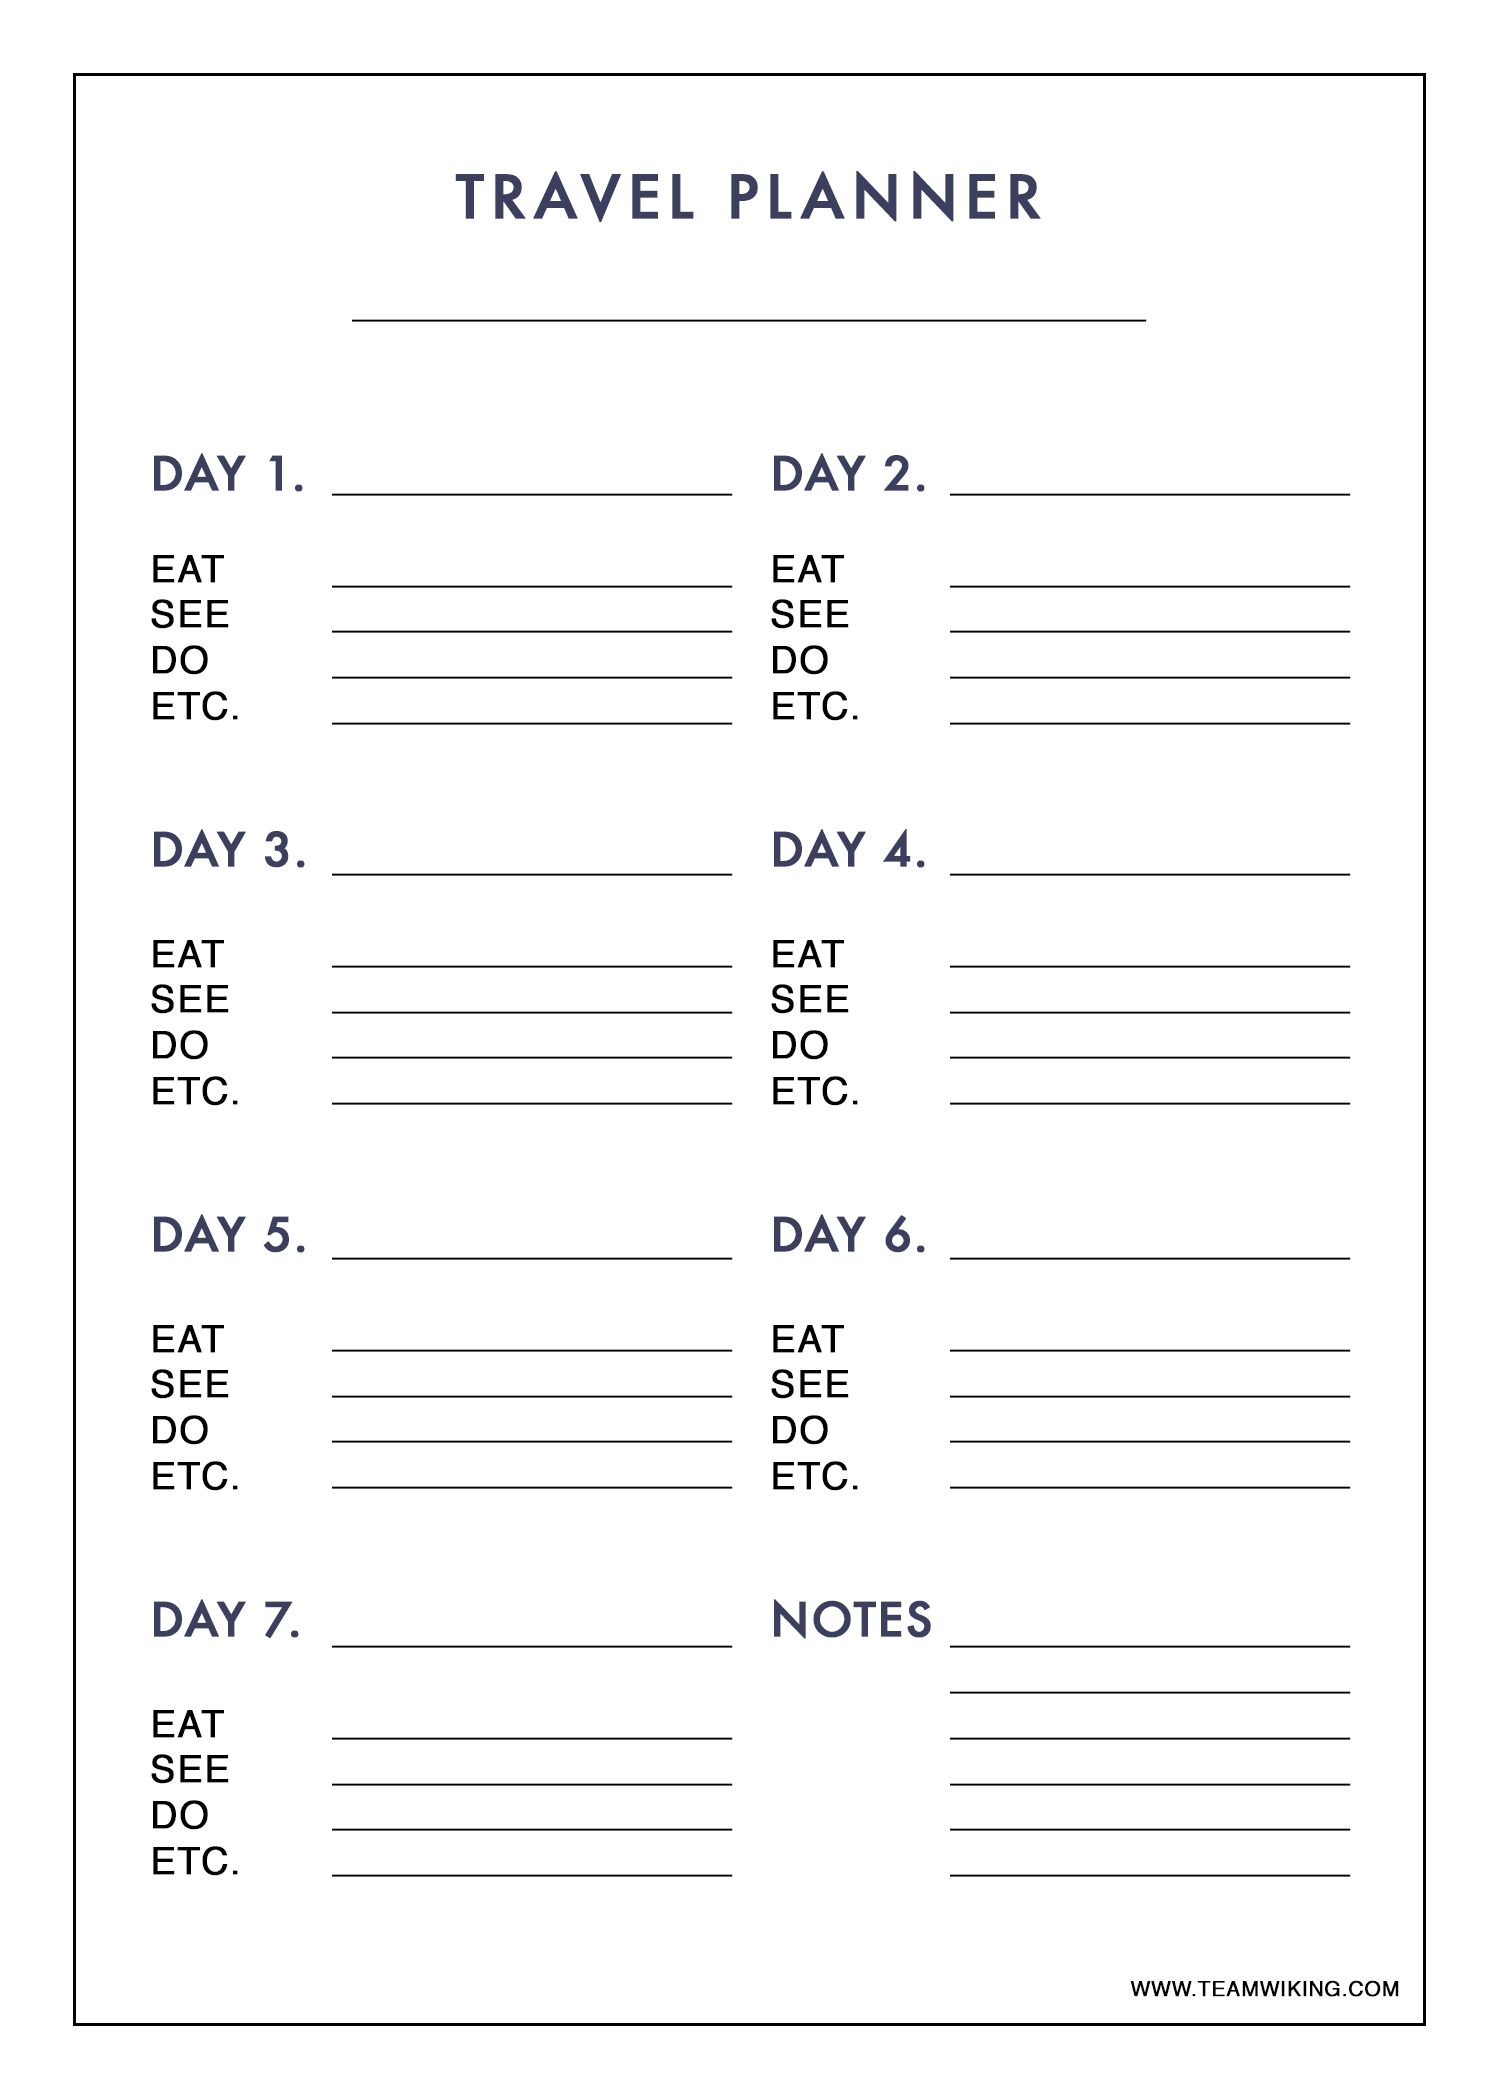 Daily Trip Planner Template Within Day To Day Travel Itinerary Template Within Day To Day Travel Itinerary Template